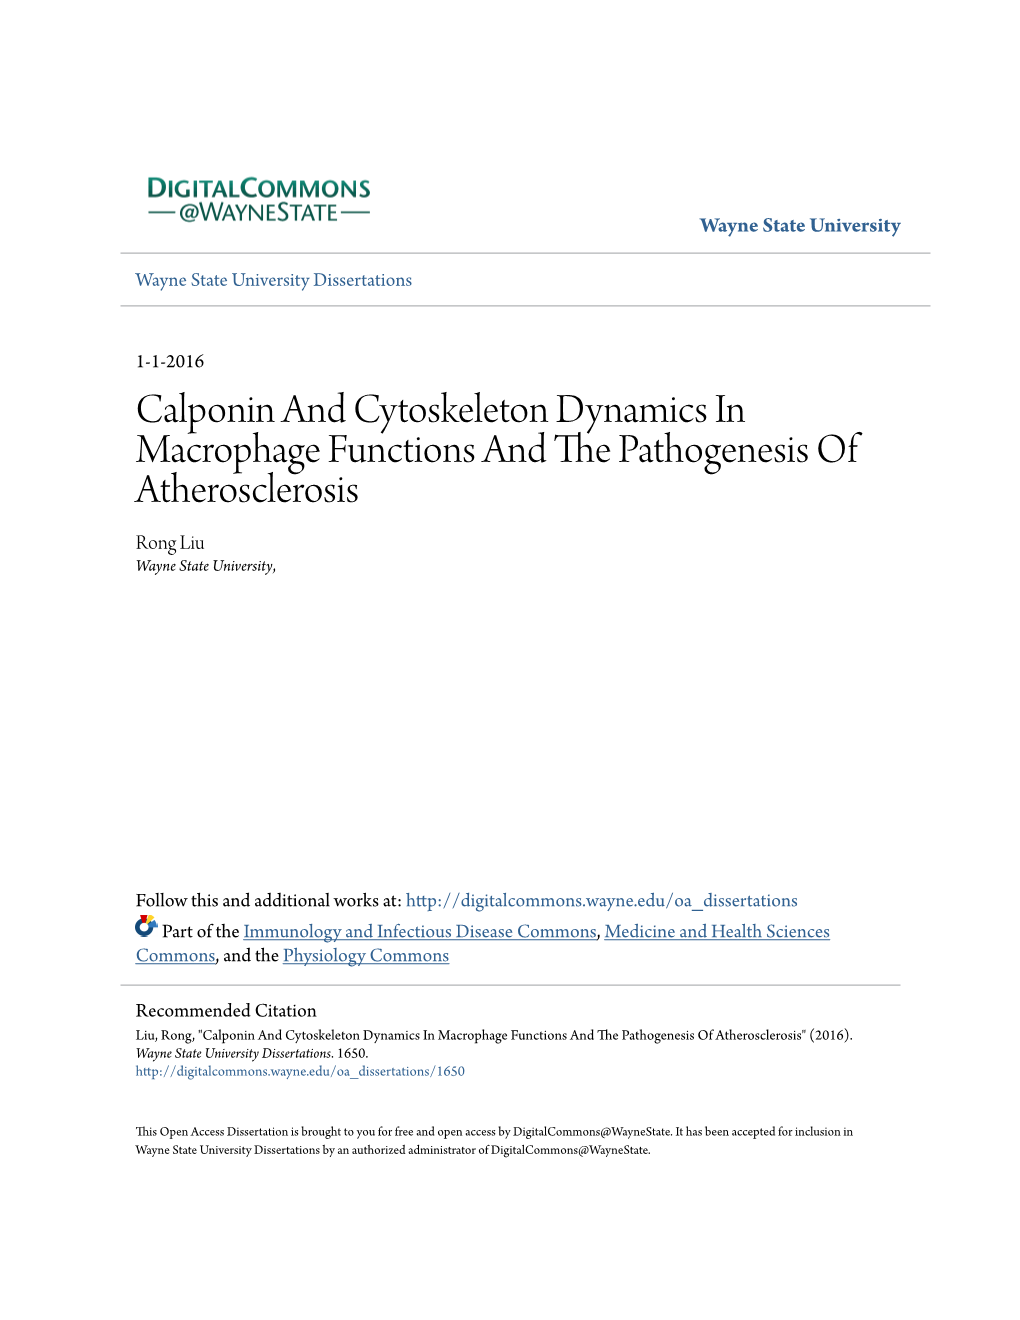 Calponin and Cytoskeleton Dynamics in Macrophage Functions and the Ap Thogenesis of Atherosclerosis Rong Liu Wayne State University